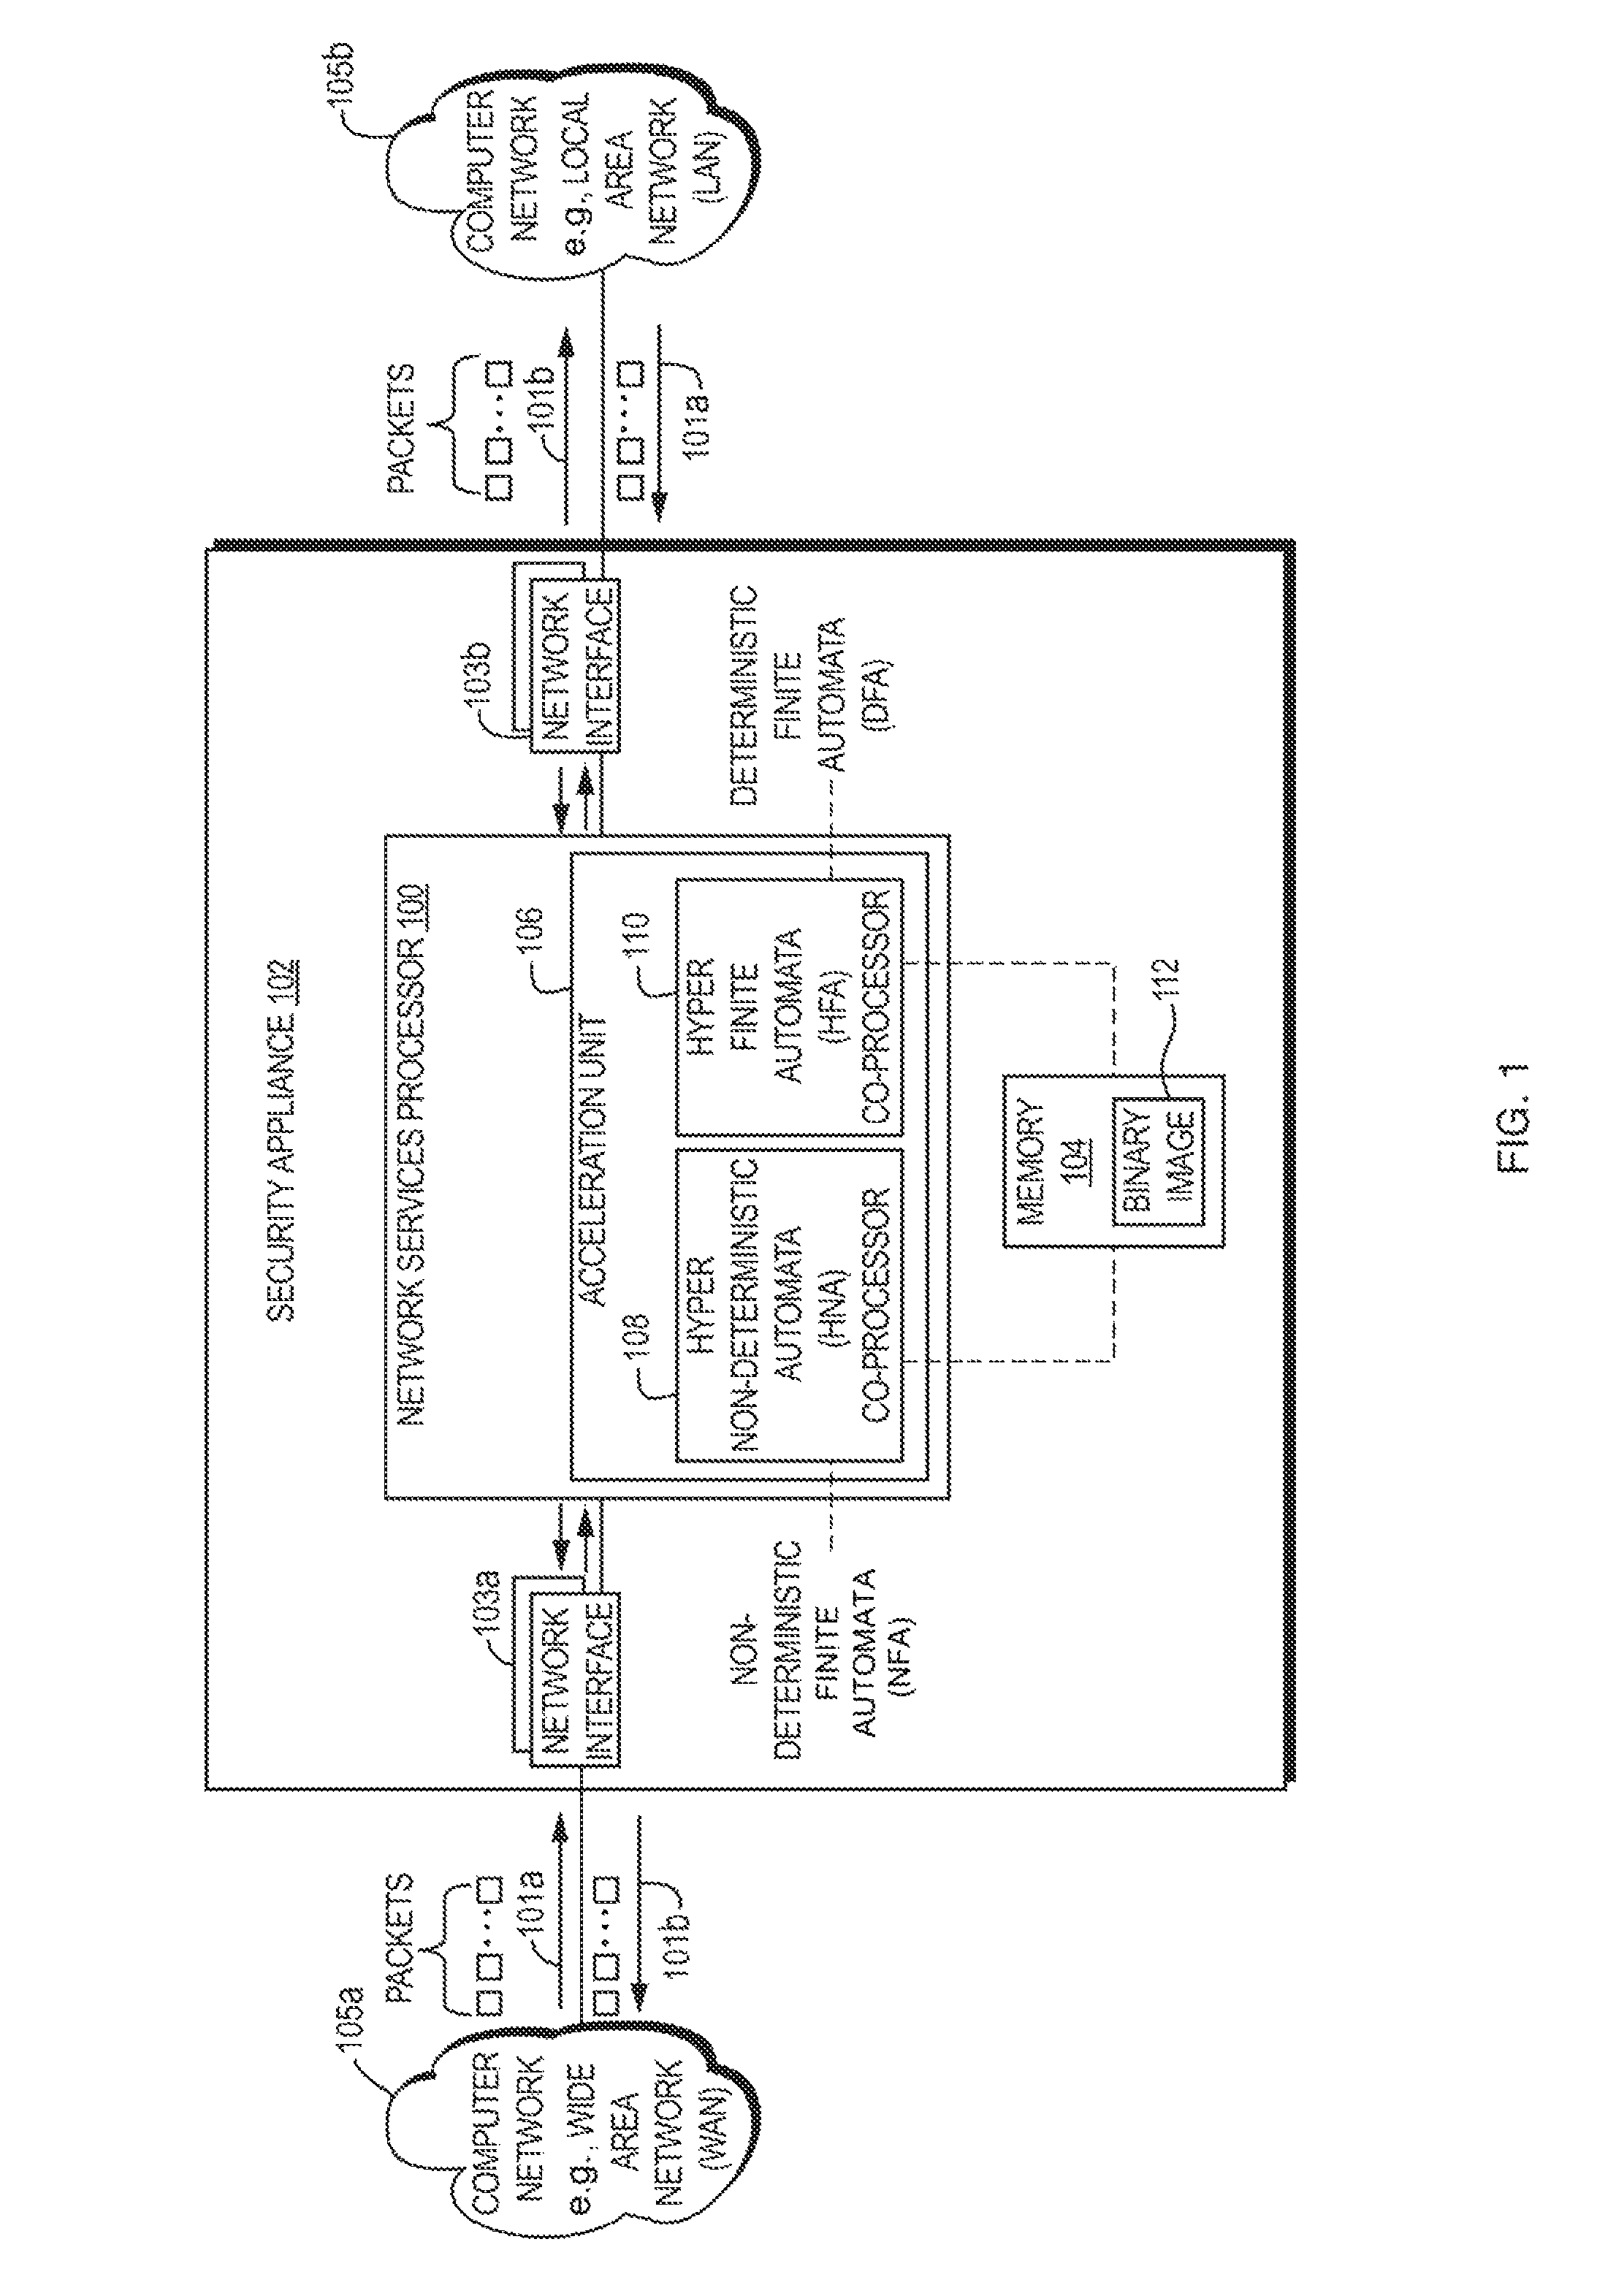 Method and apparatus for compilation of finite automata